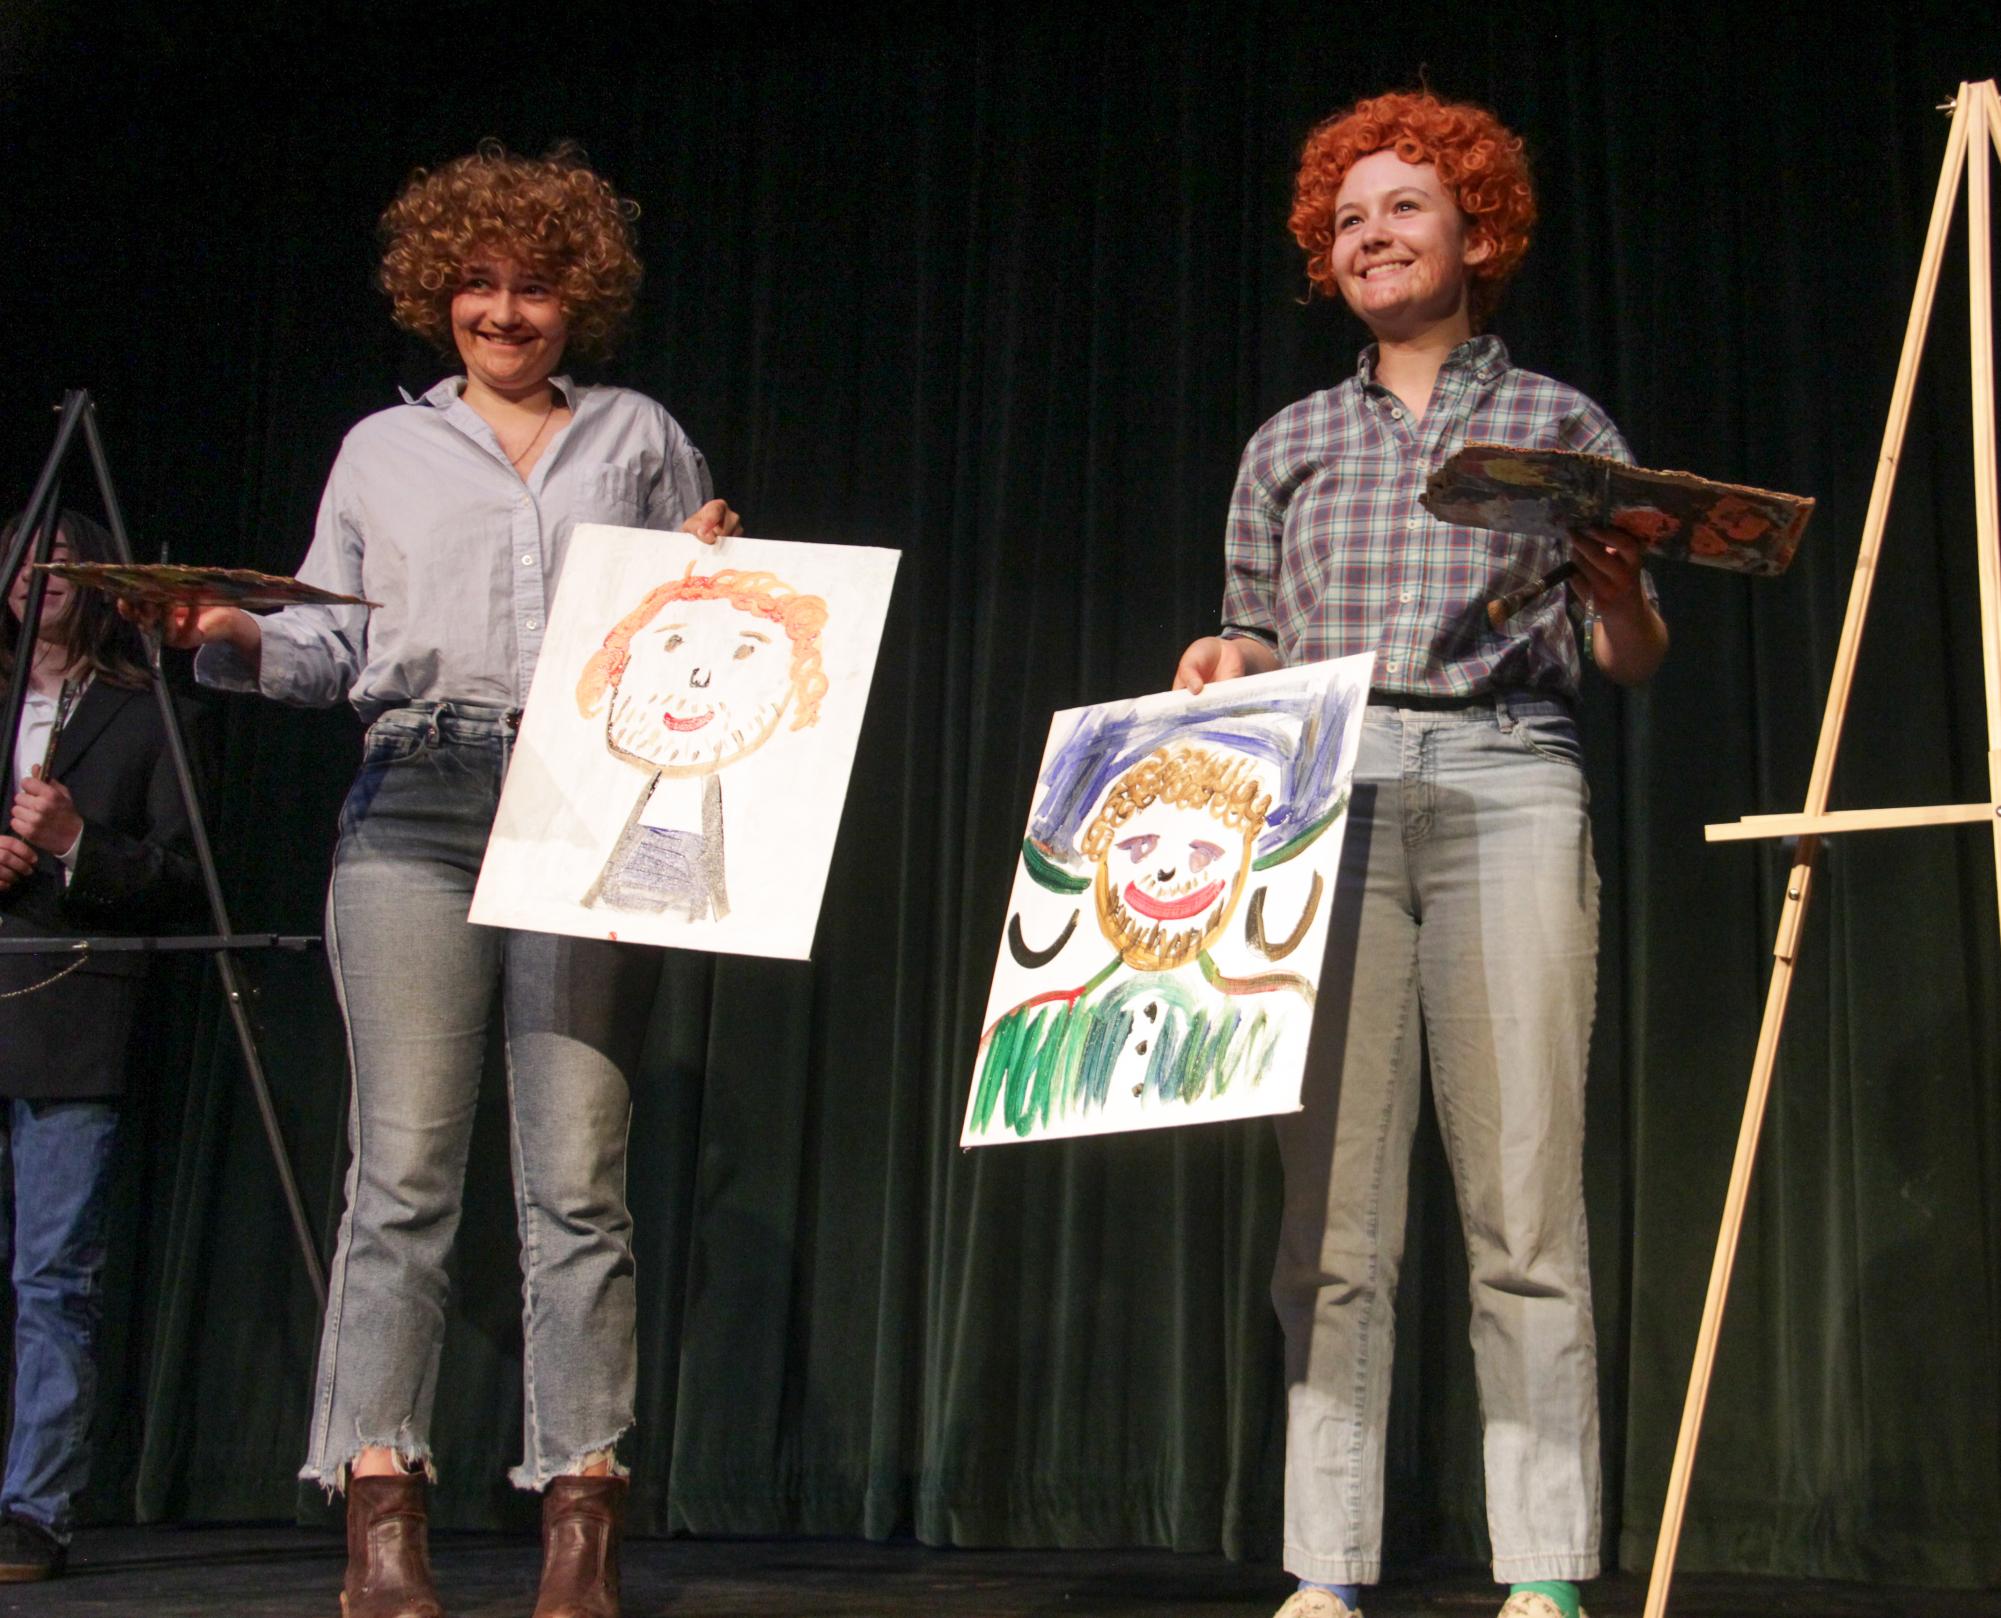 Archie Williams juniors Linnea Nowlen and Lilli Walker present their masterpieces after an improvised comedic sketch.